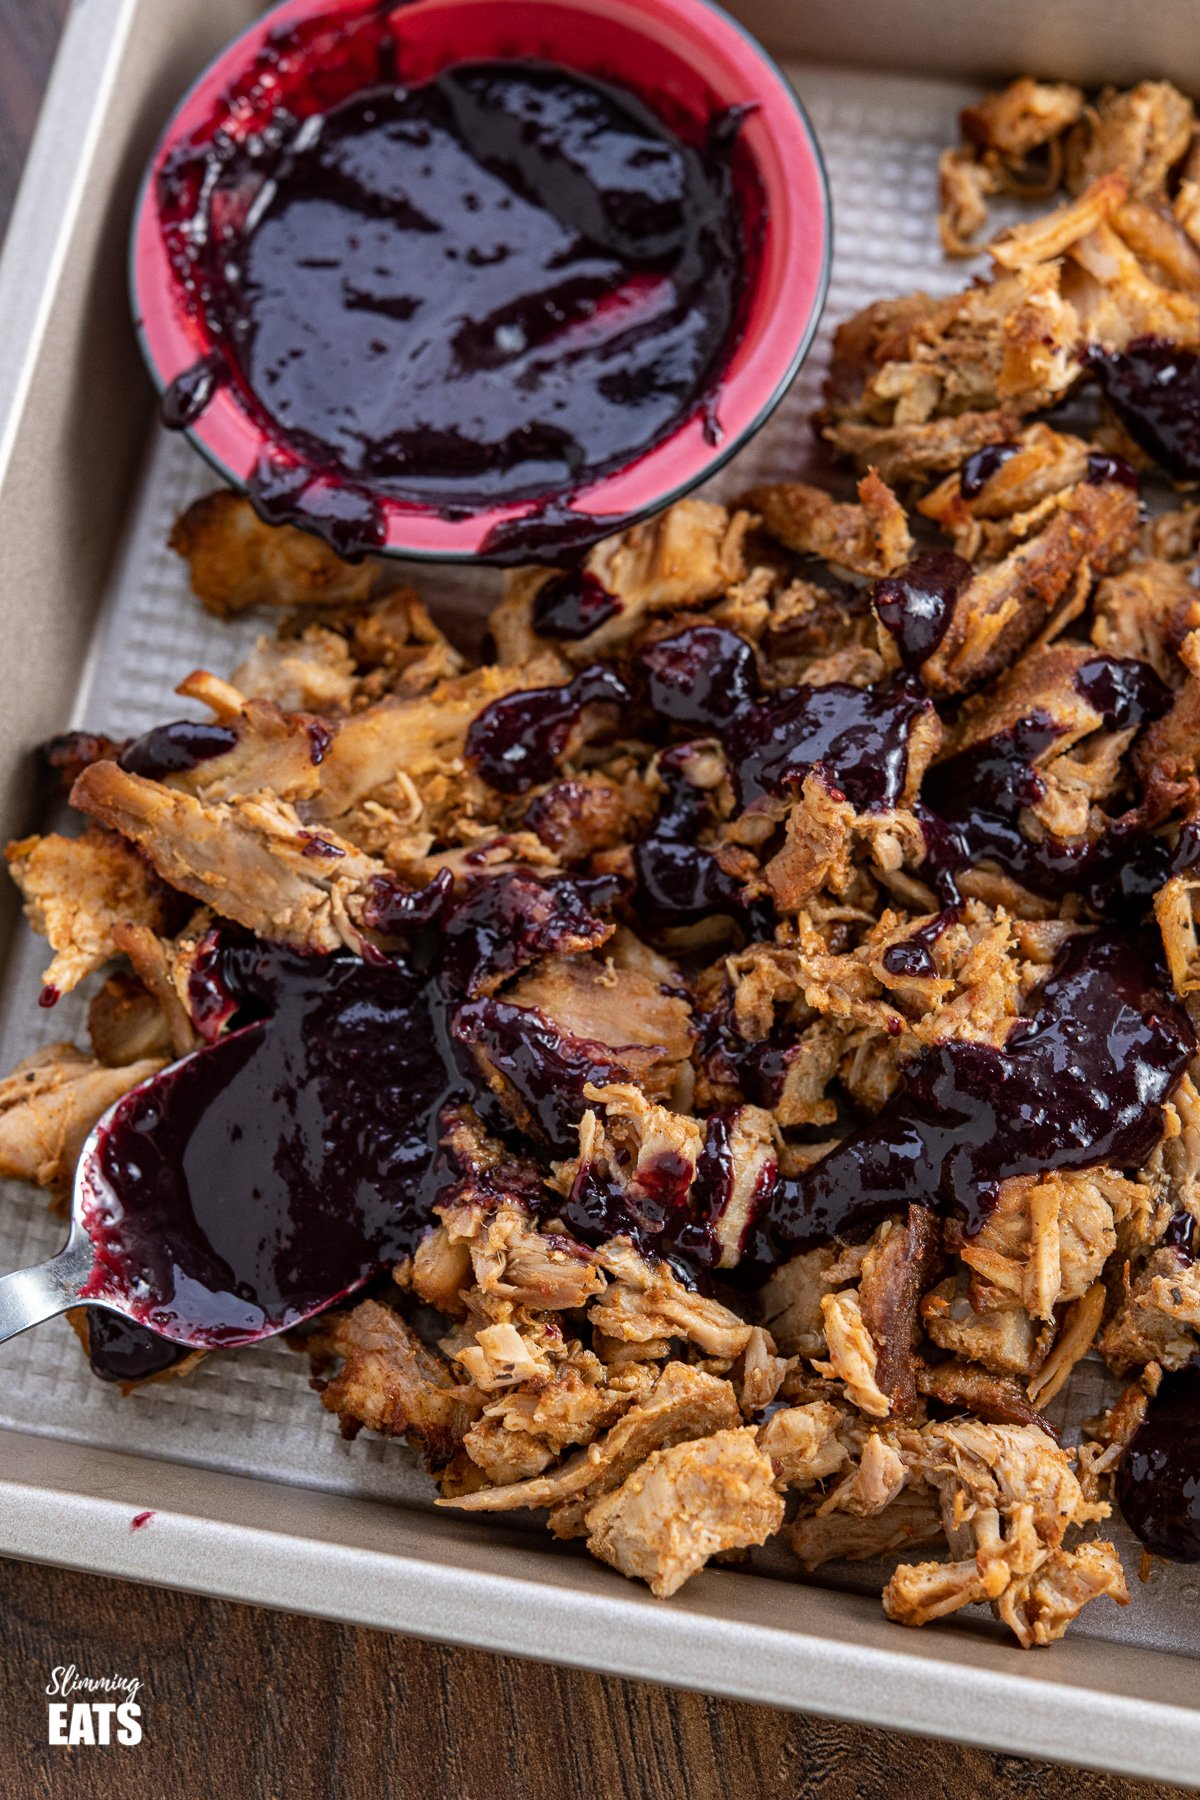 Pulled Pork with Blueberry BBQ sauce with drizzled blueberry bbq sauce